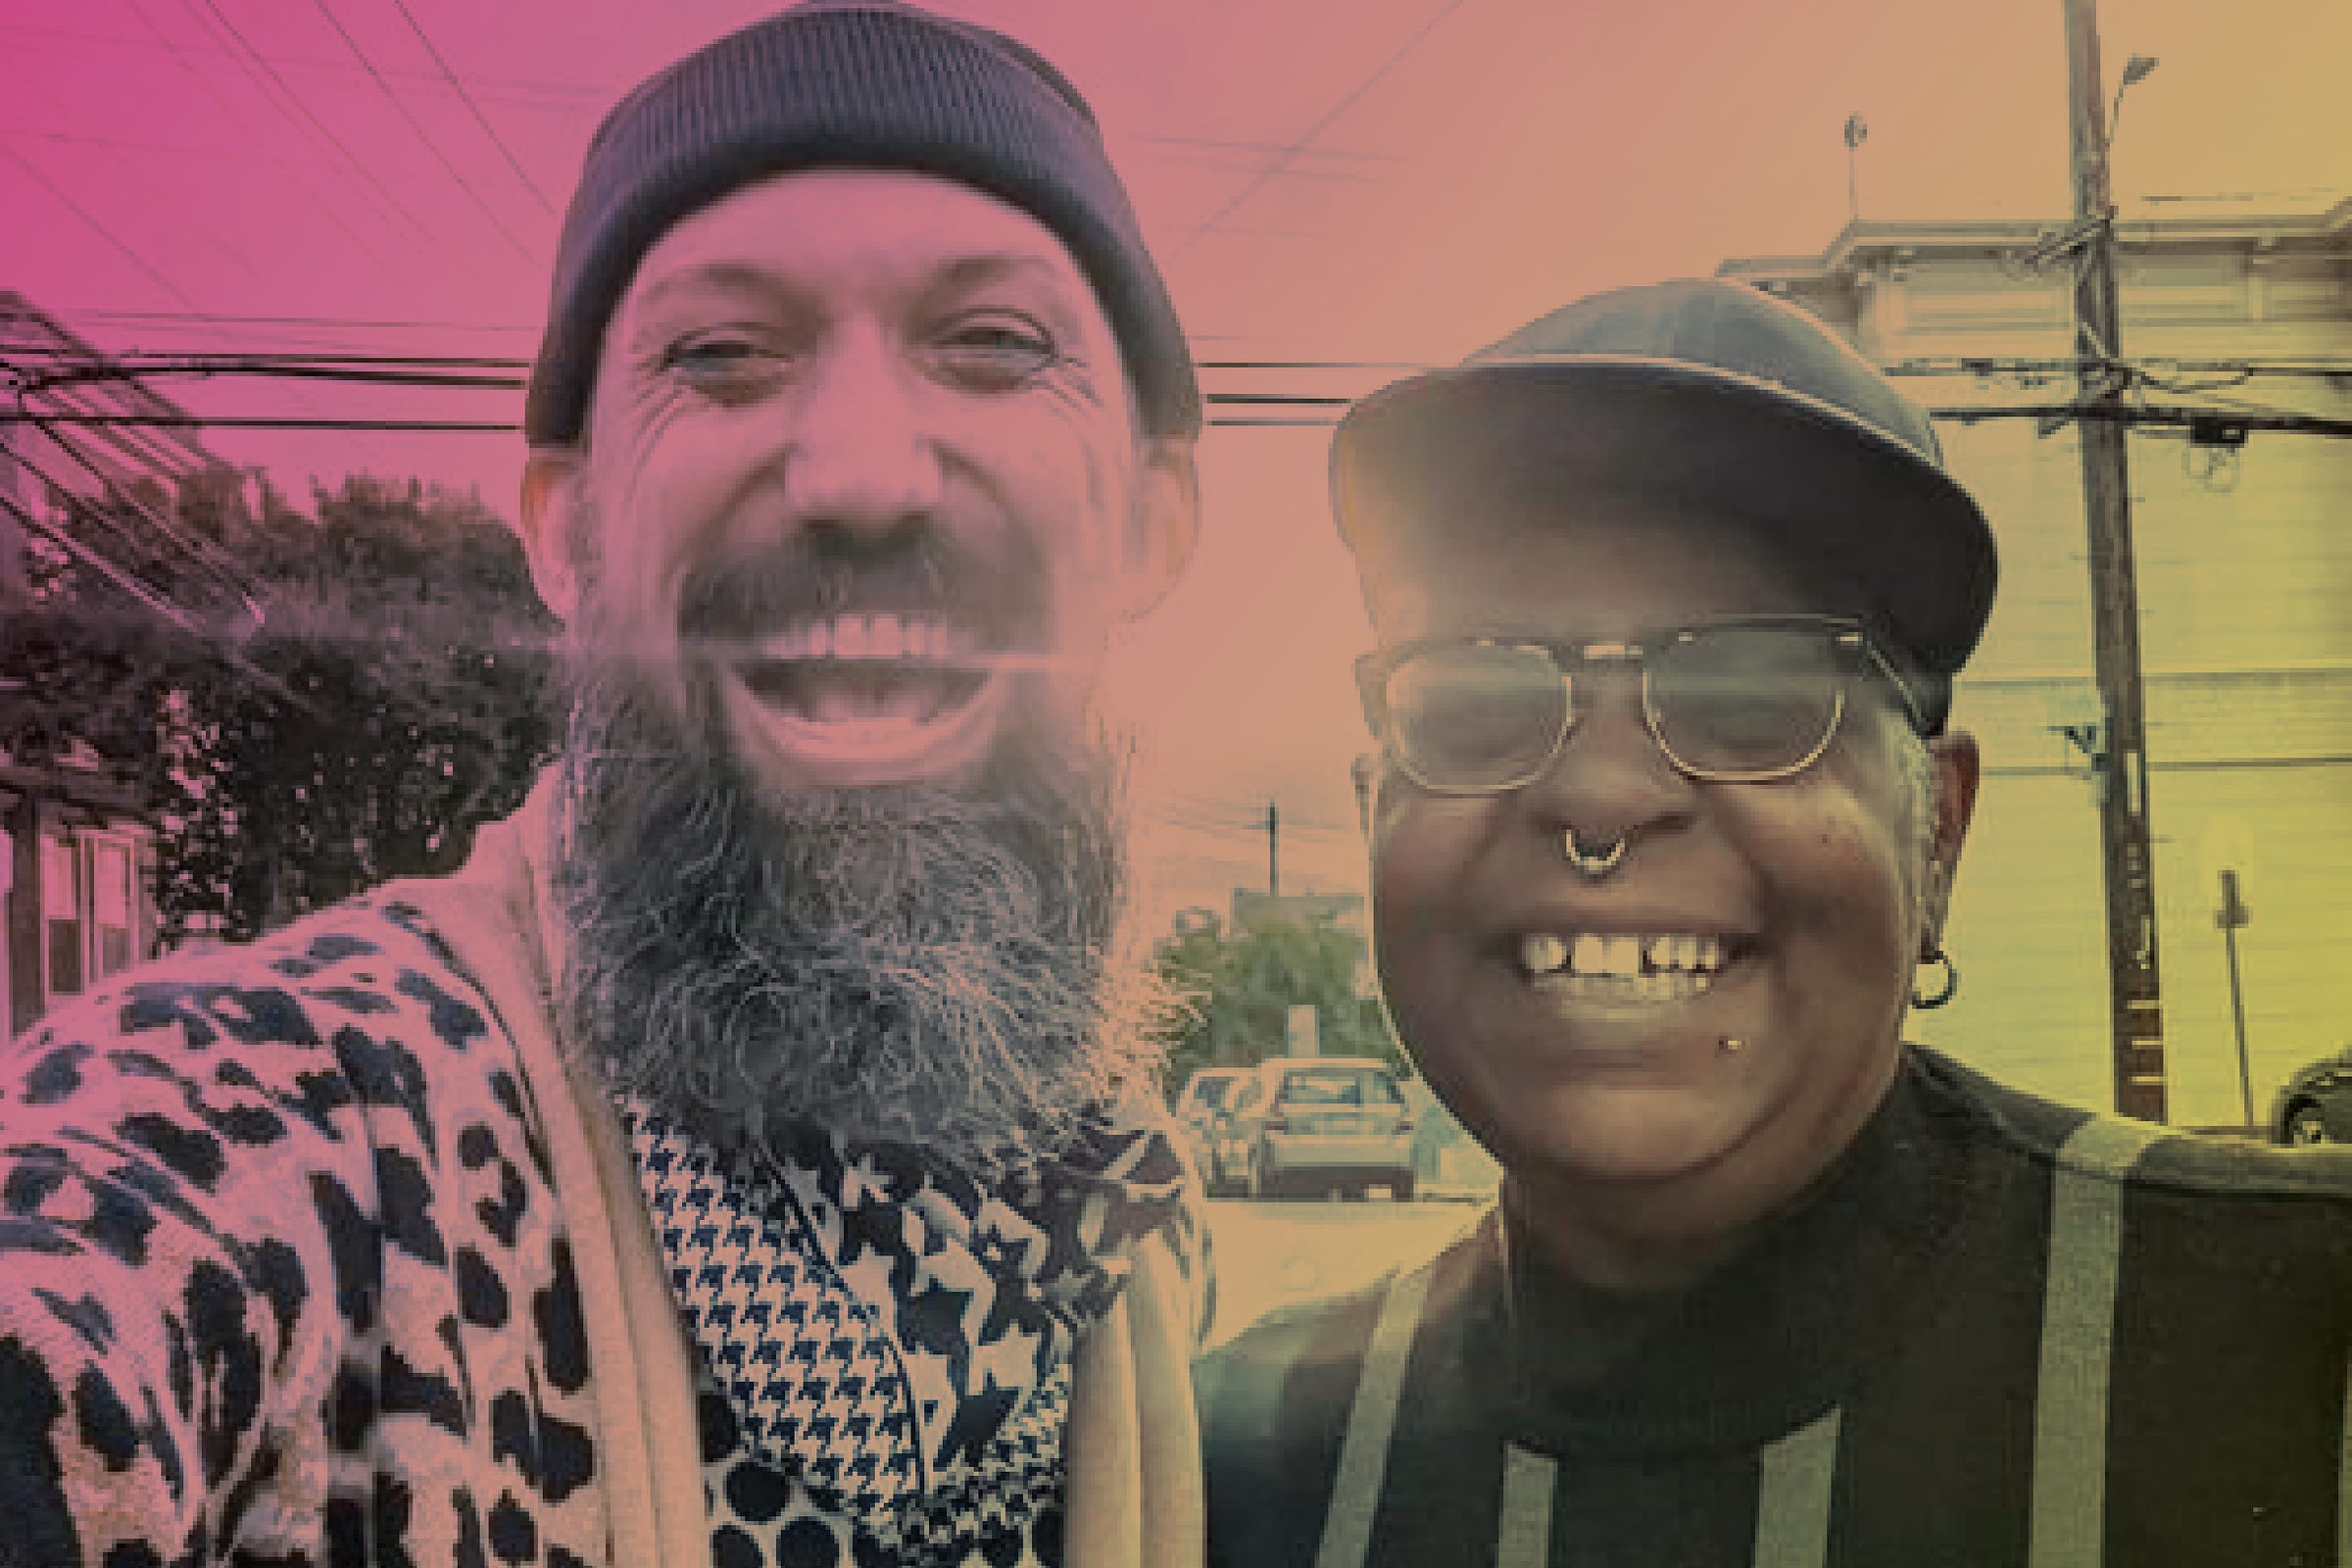 Colorized selfie of Jason Wyman and Crystal Mason smiling with the sun coming through behind them. They are wearing hats. Jason has on various patterns. Crystal has on a black and gray striped sweater.